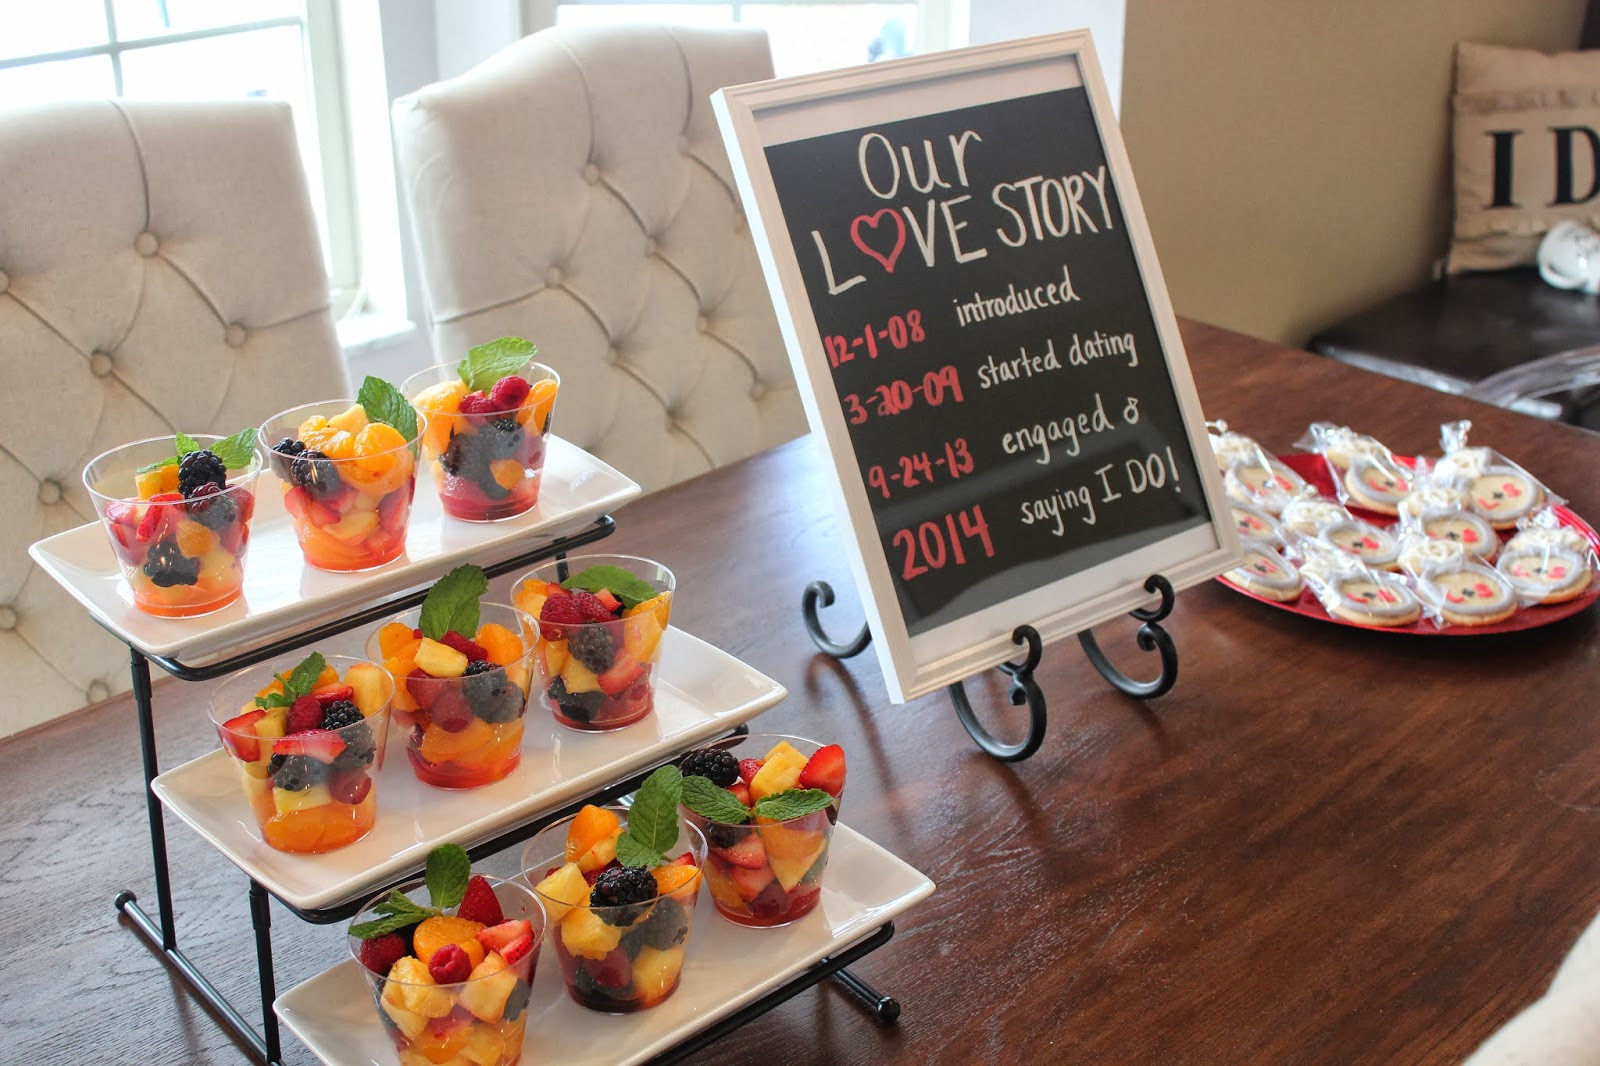 Brunch Engagement Party Ideas
 KEEP CALM AND CARRY ON My Best Friend s Engagement Party